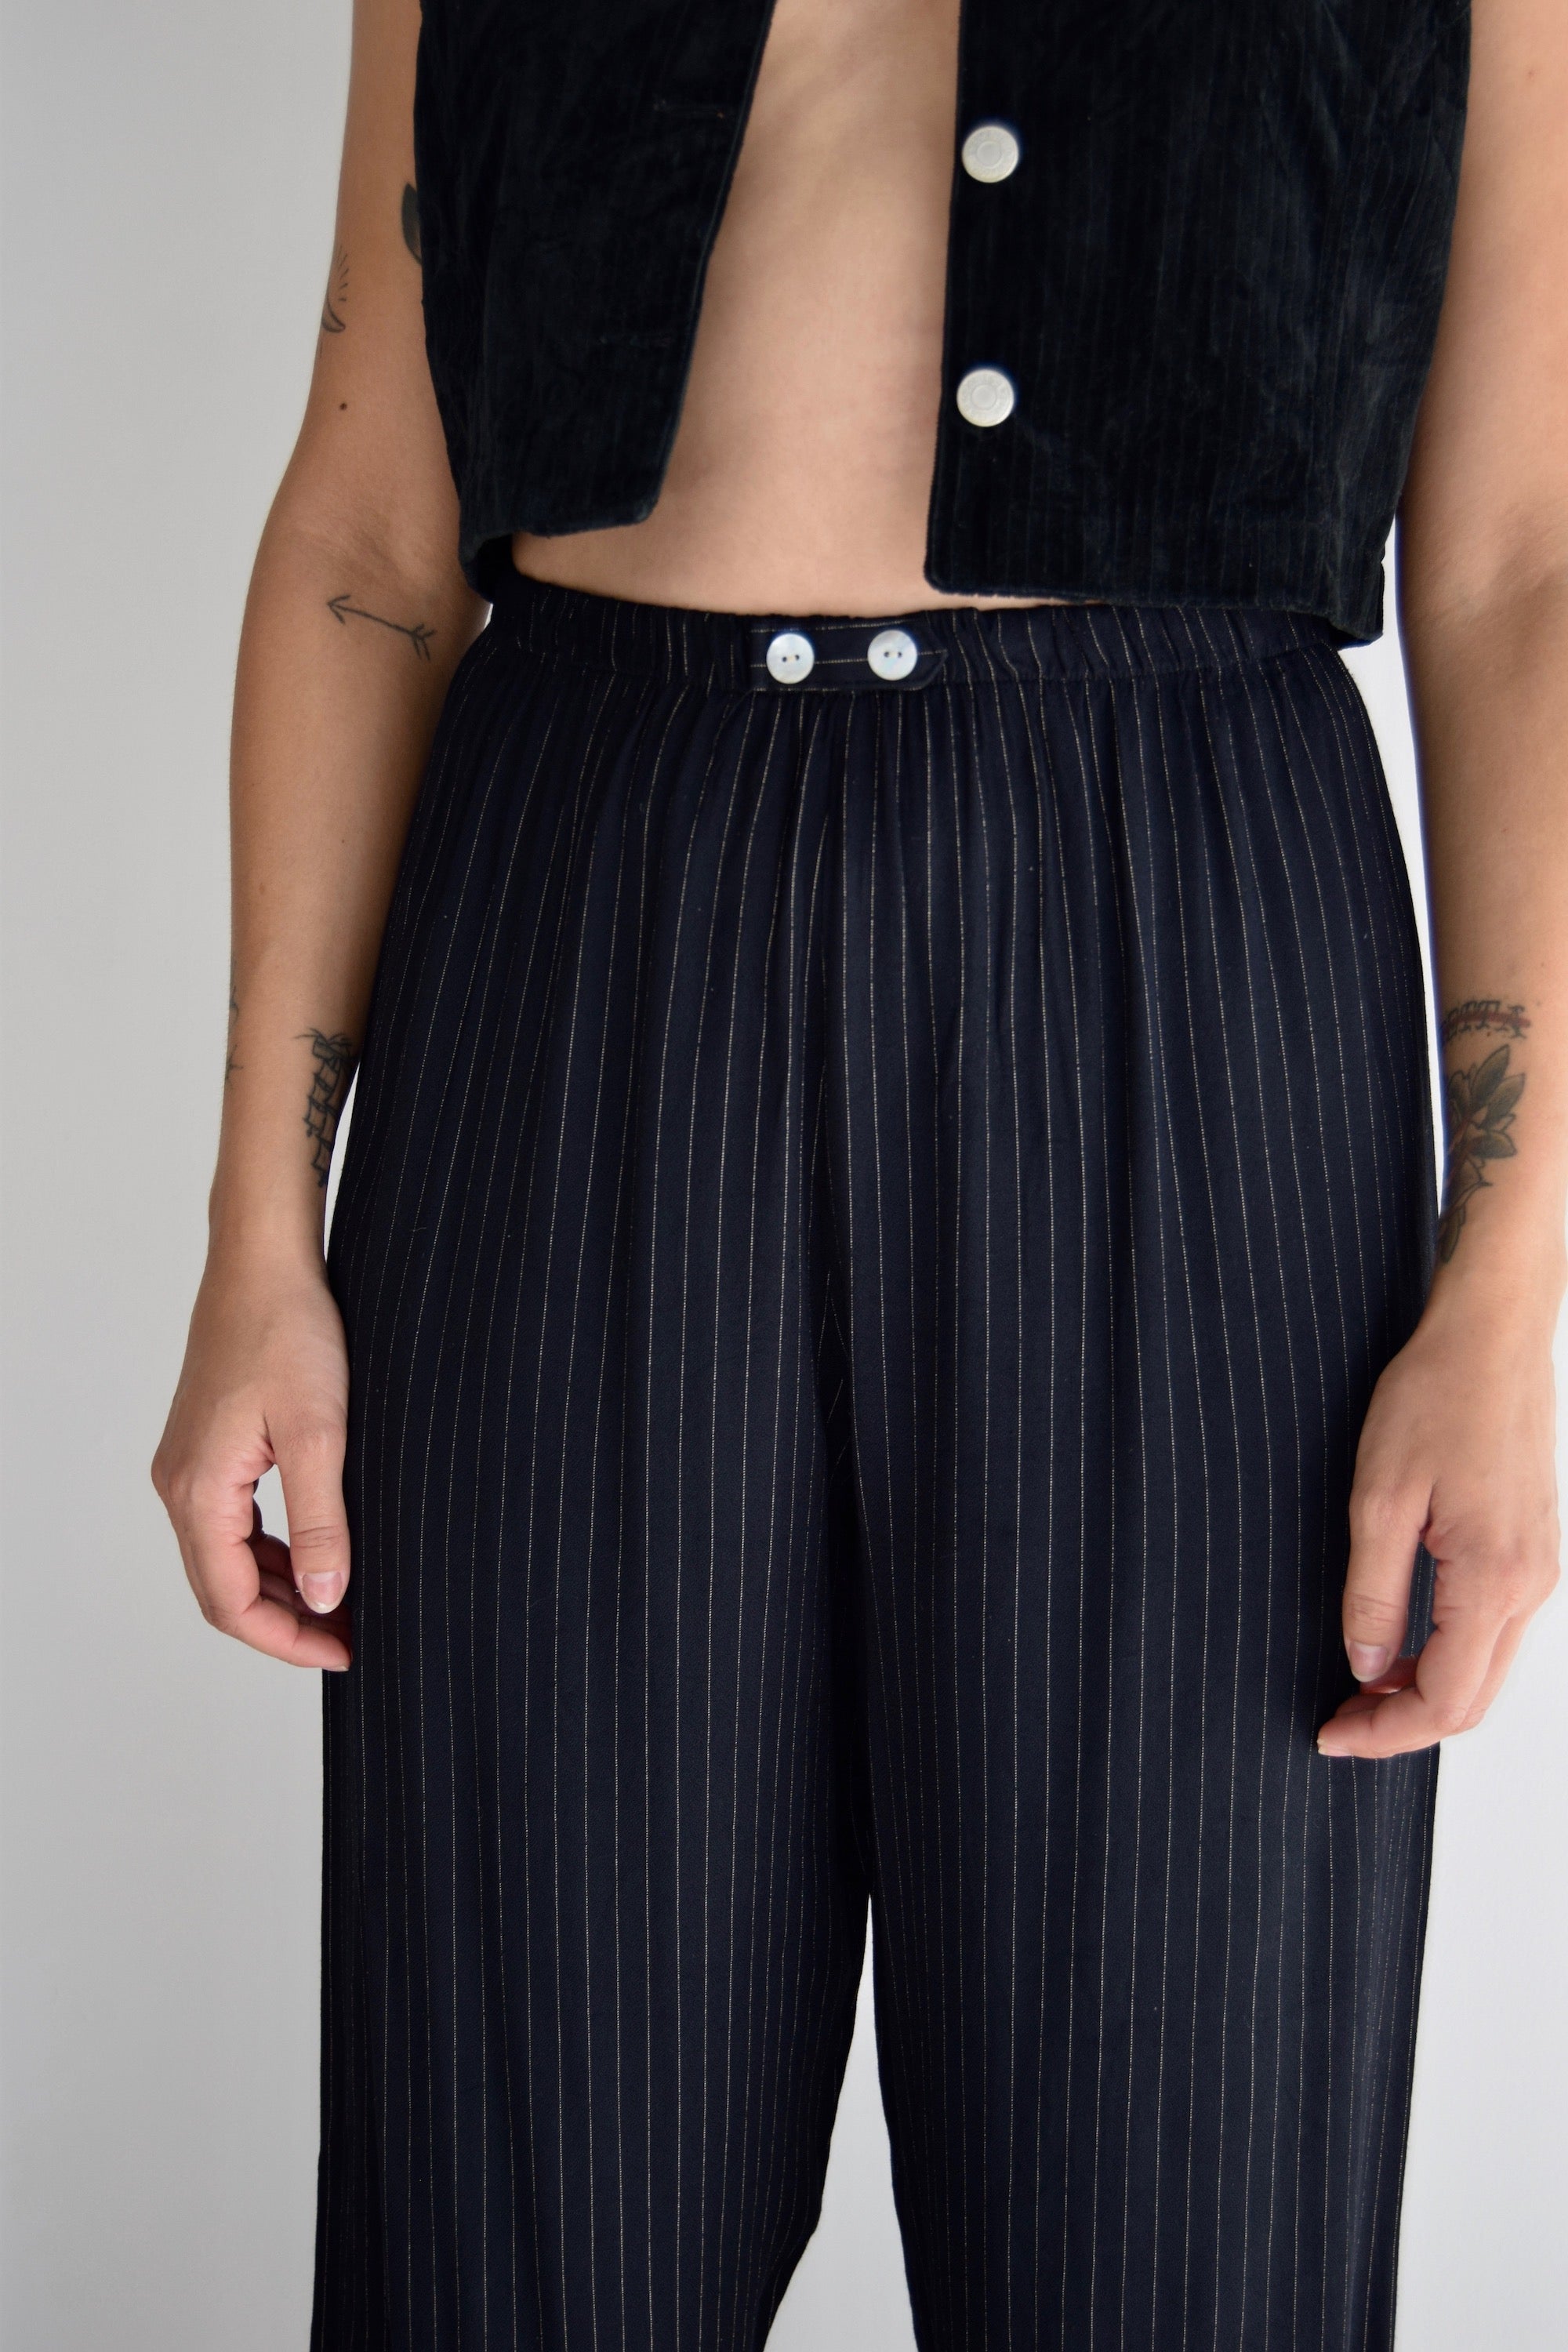 Black and Buff Pinstriped Rayon Trousers